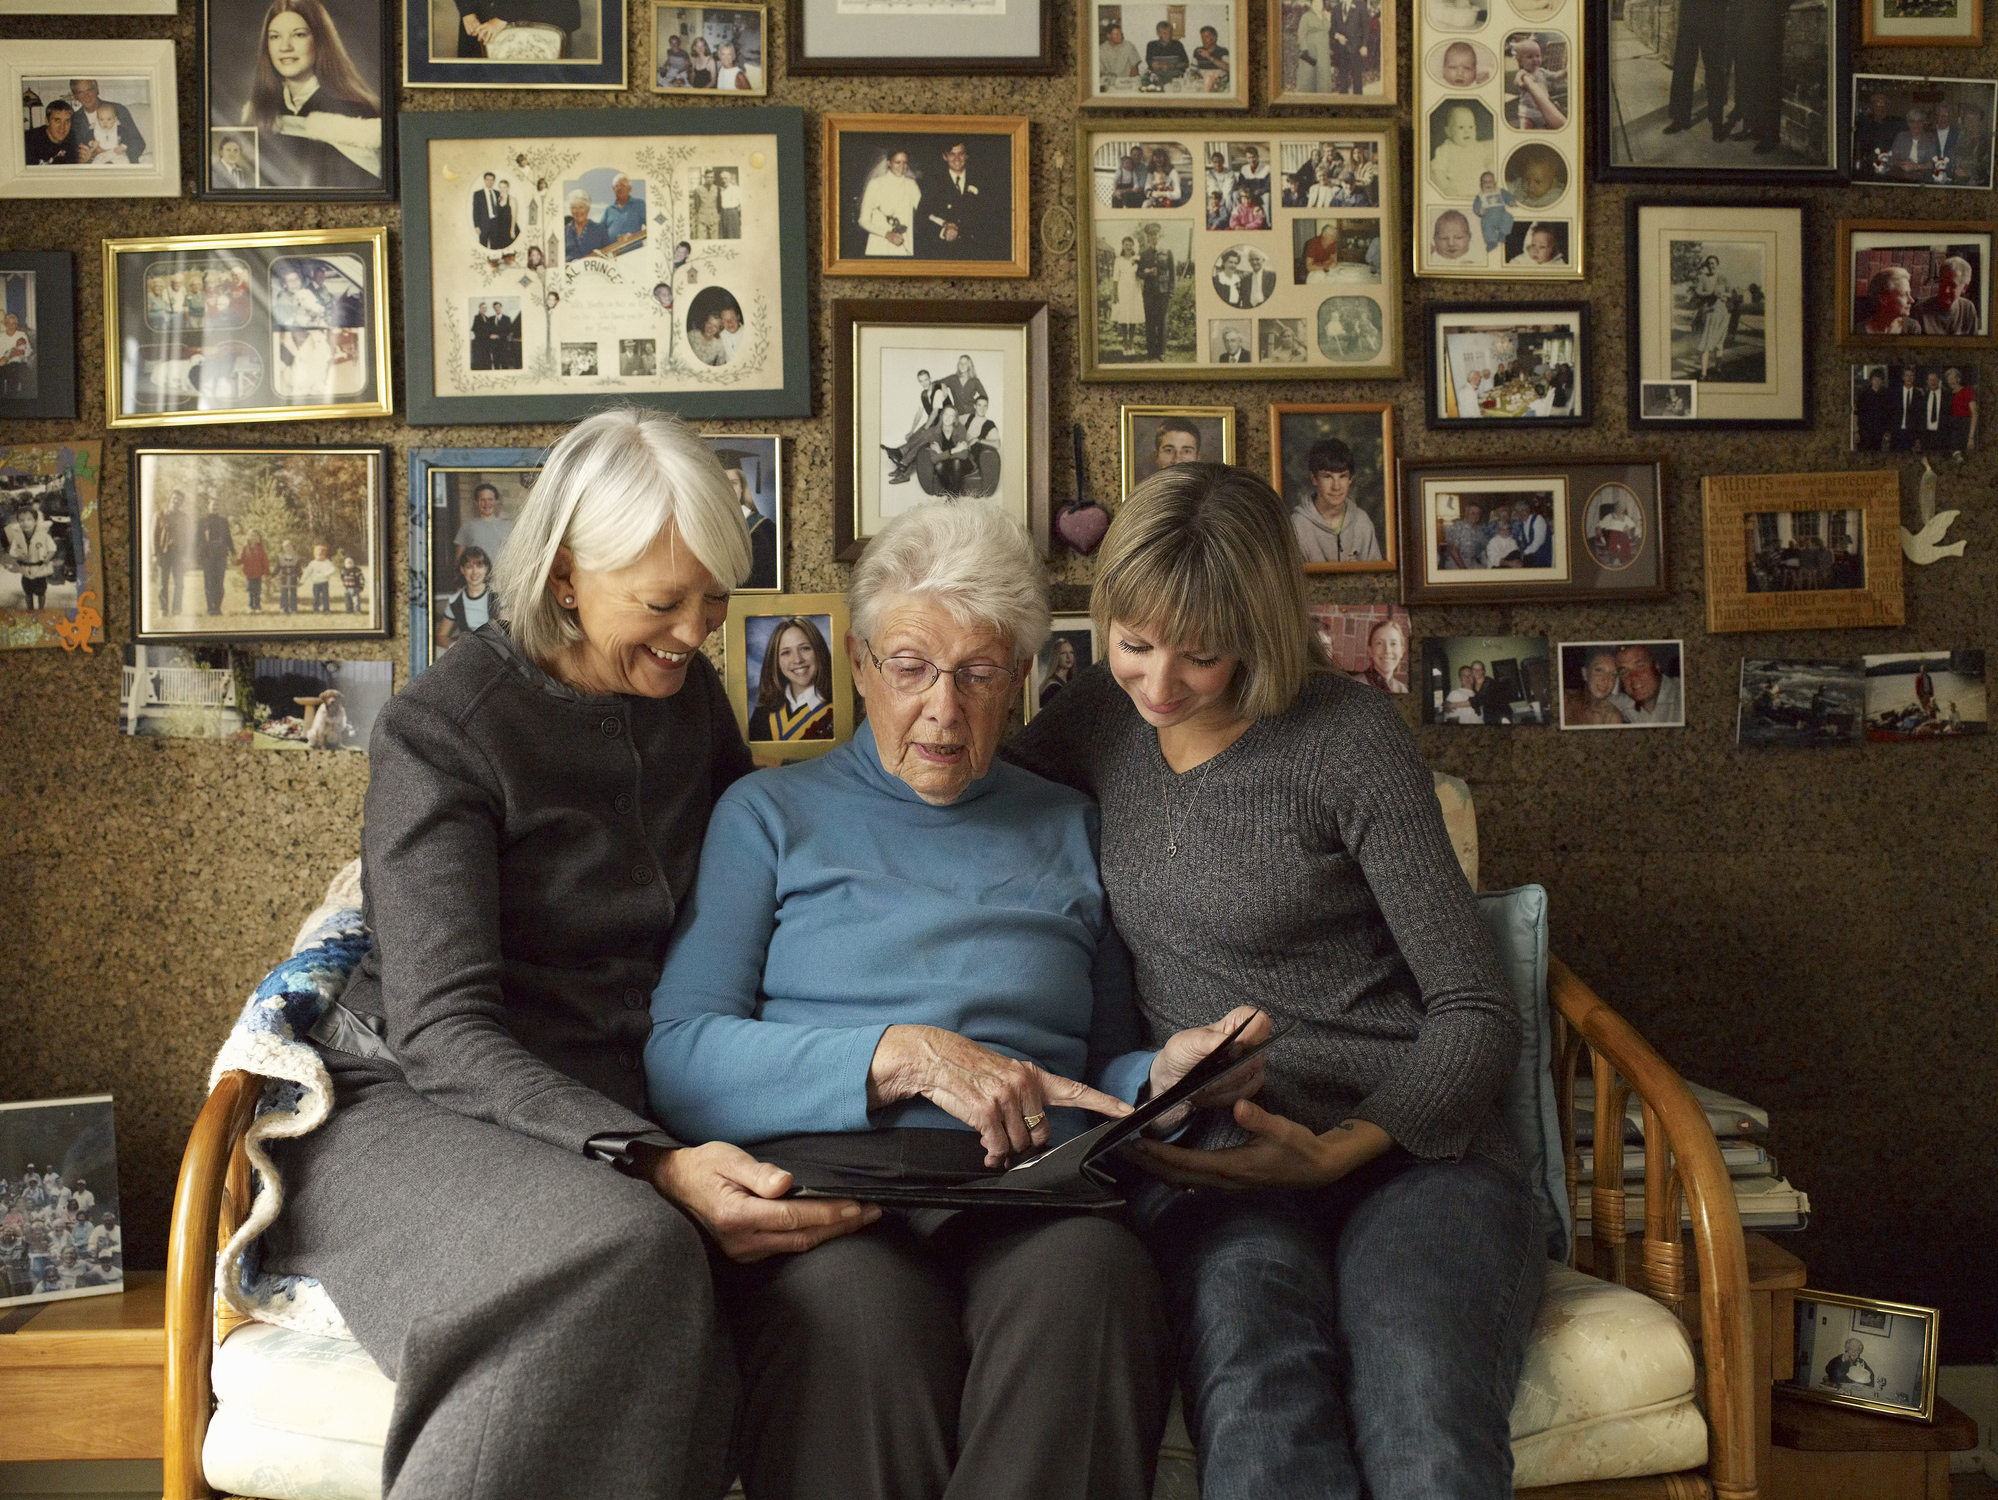 Three older women look at family photos together